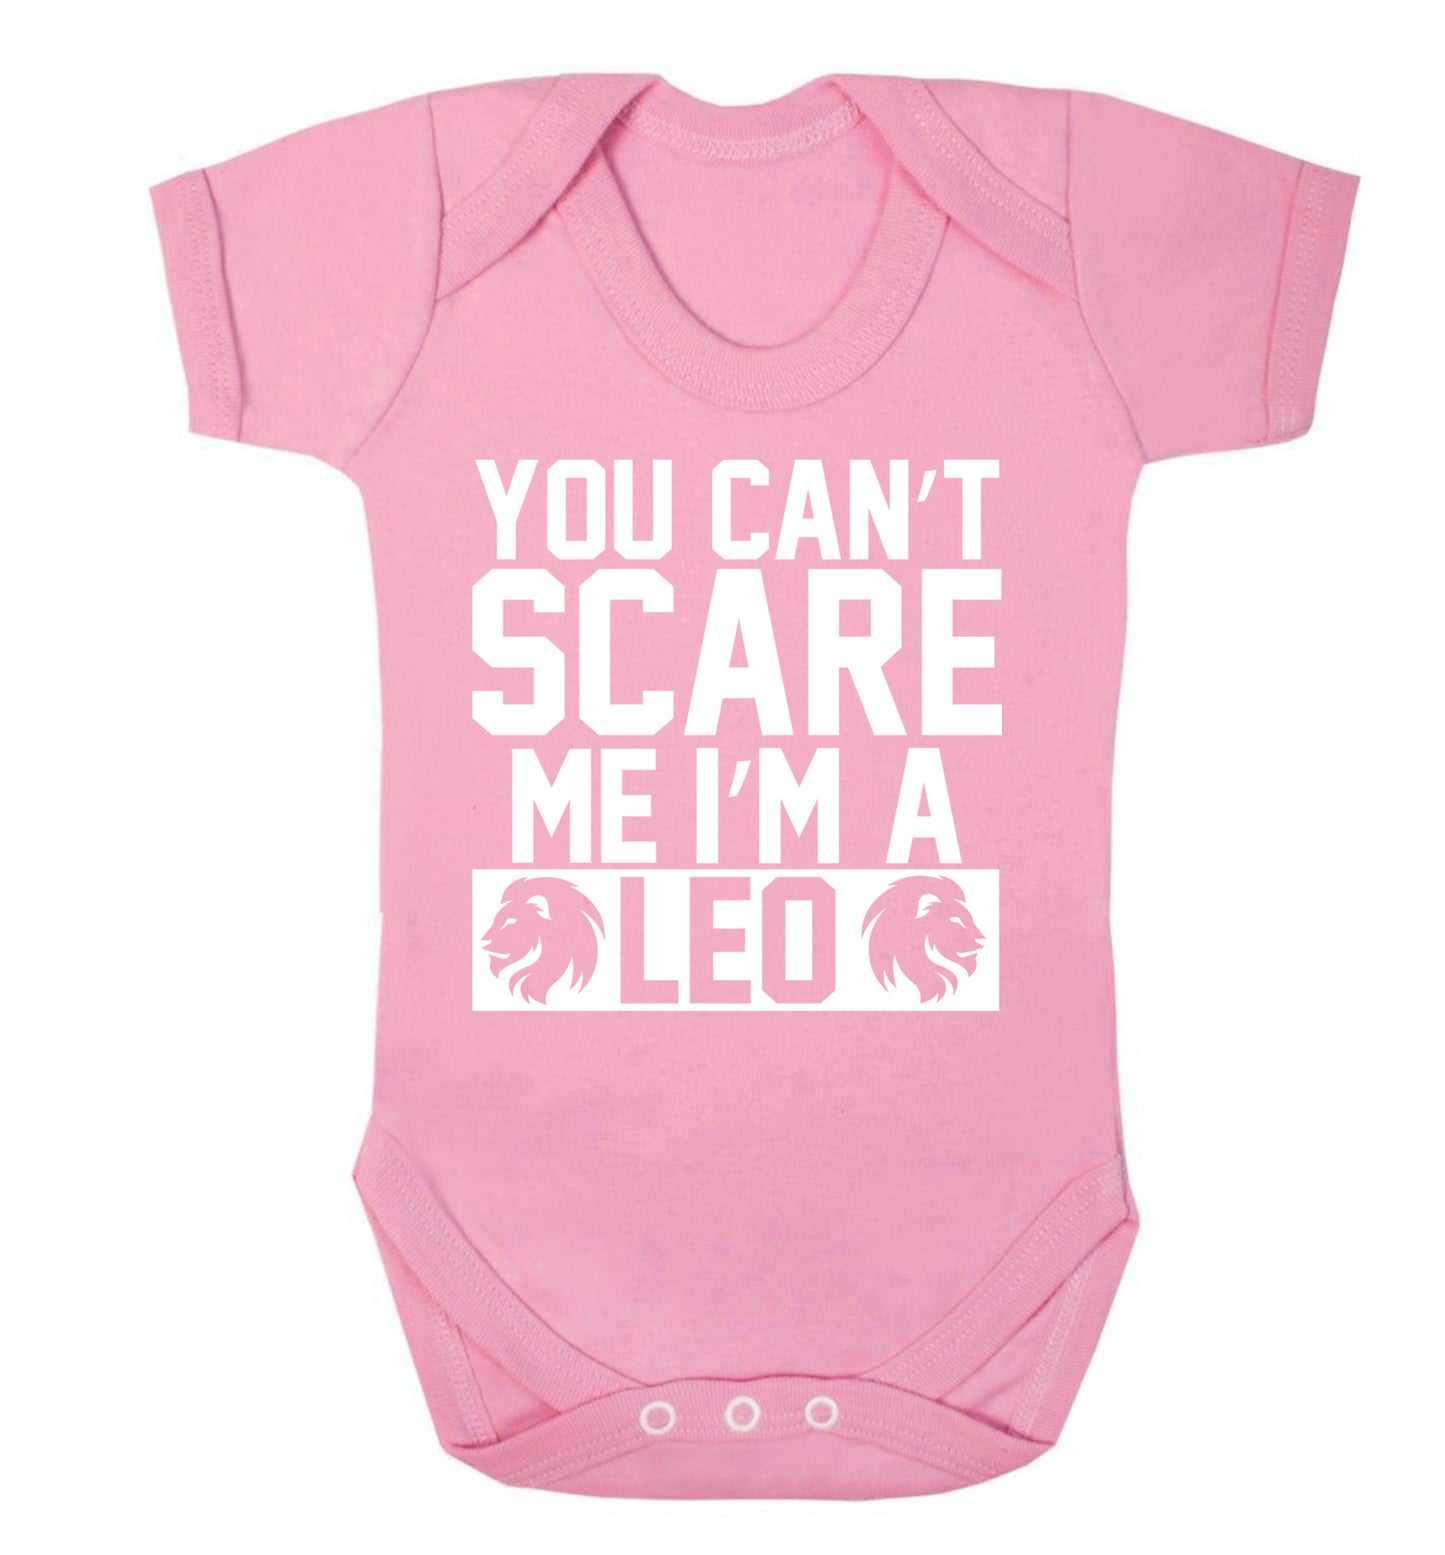 You can't scare me I'm a leo Baby Vest pale pink 18-24 months